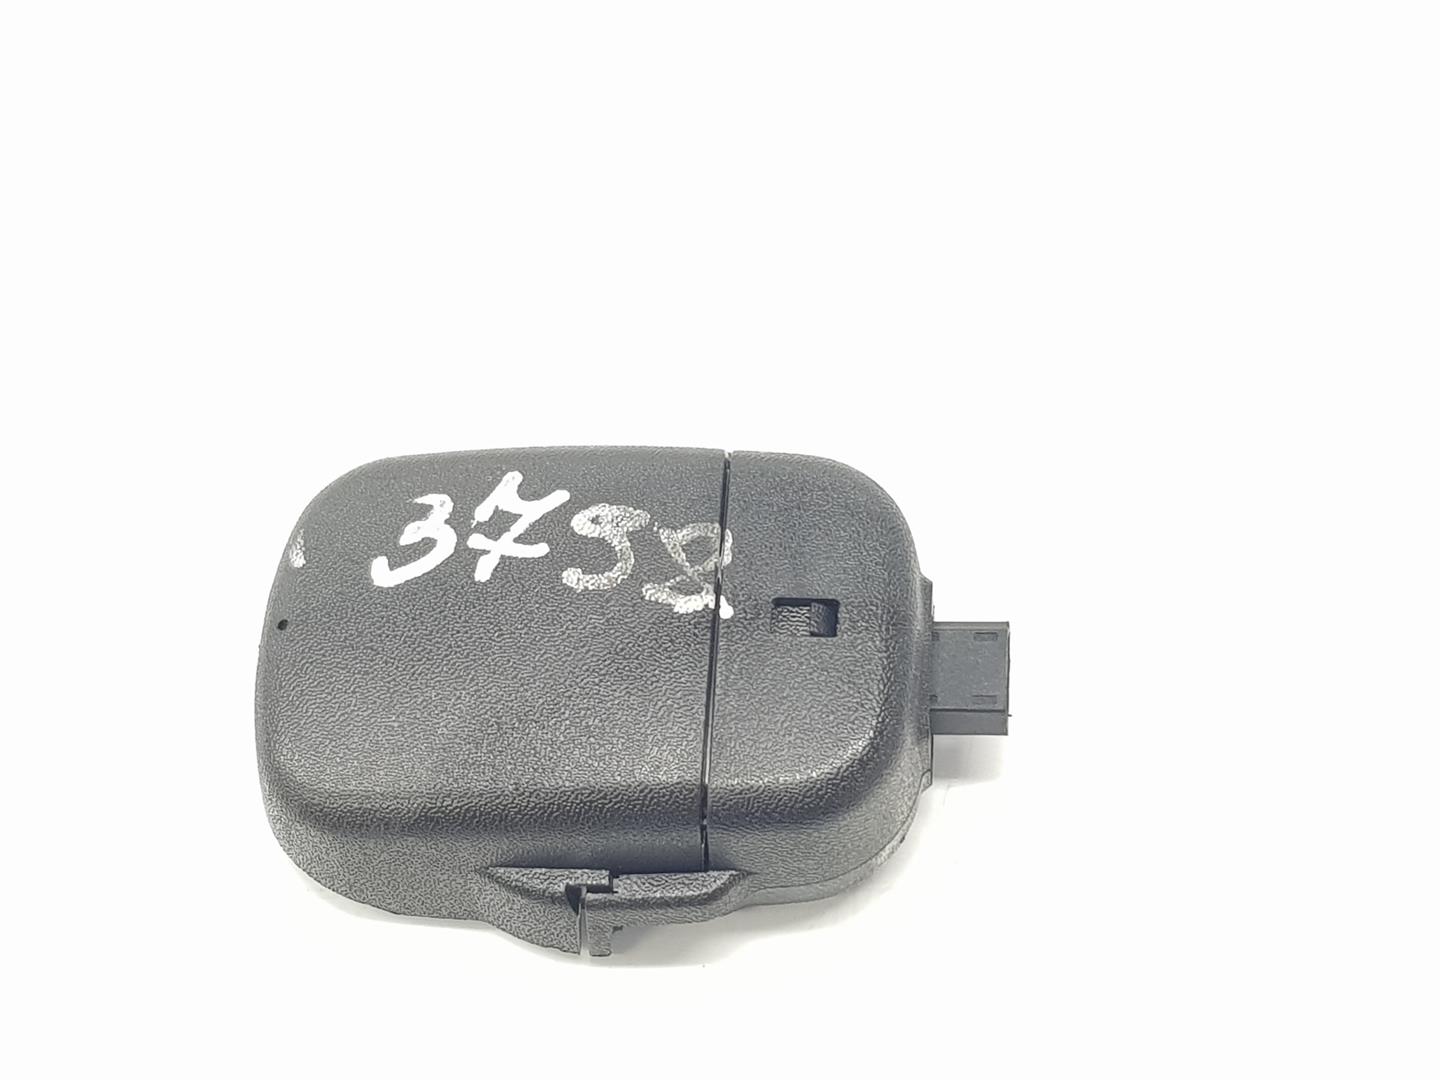 OPEL Insignia A (2008-2016) Other Control Units 13311618, 13311618 21077800